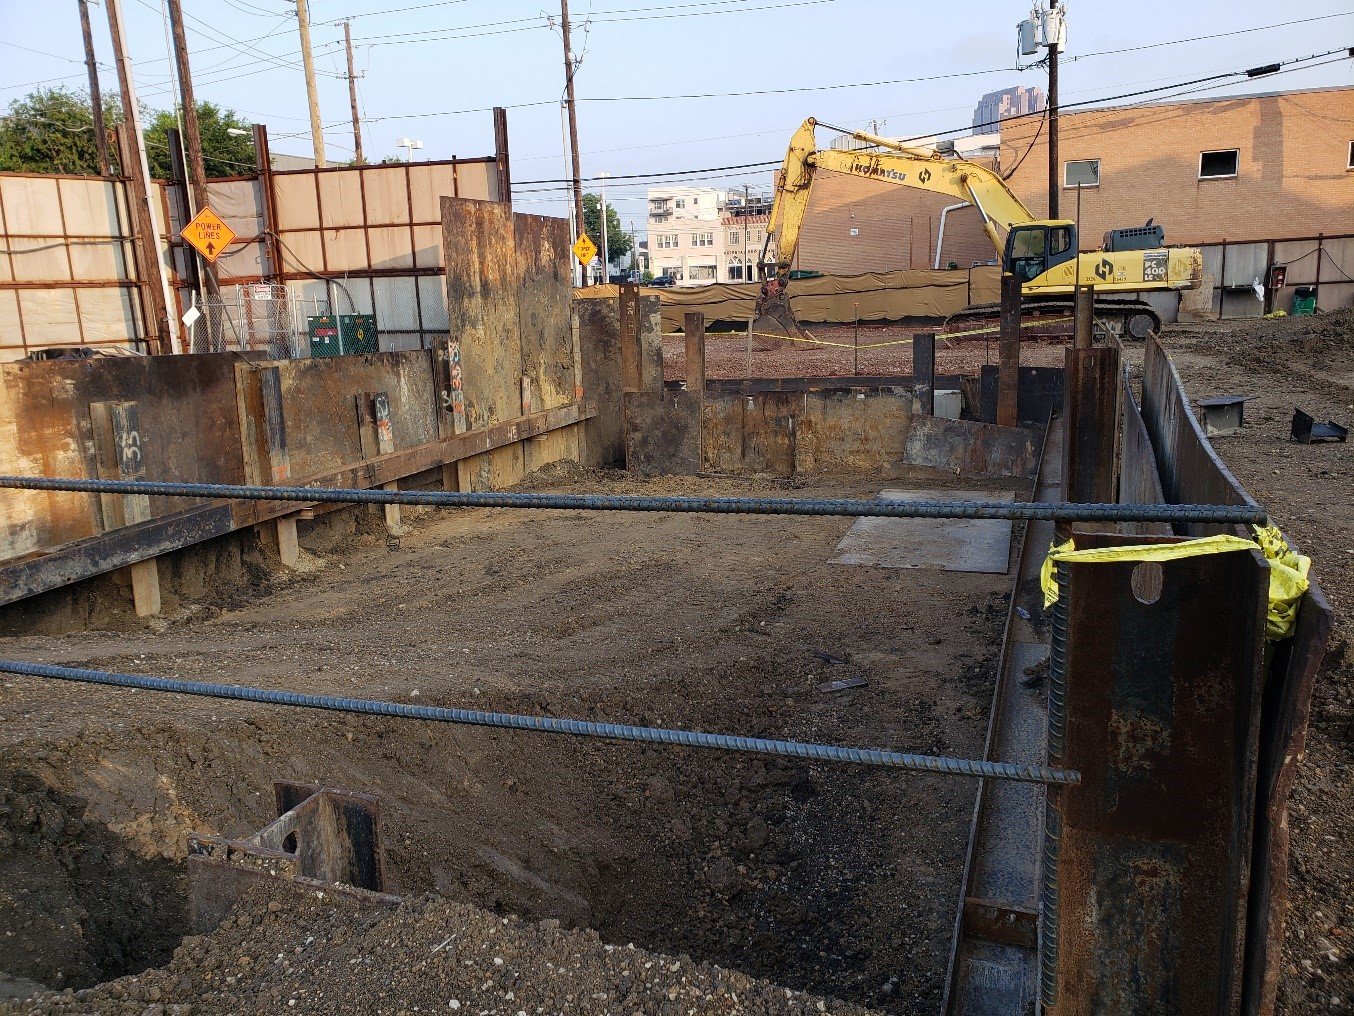 July 2021 - Excavation for the Box Culvert between the Junction Structure and the Shaft Intake Structure